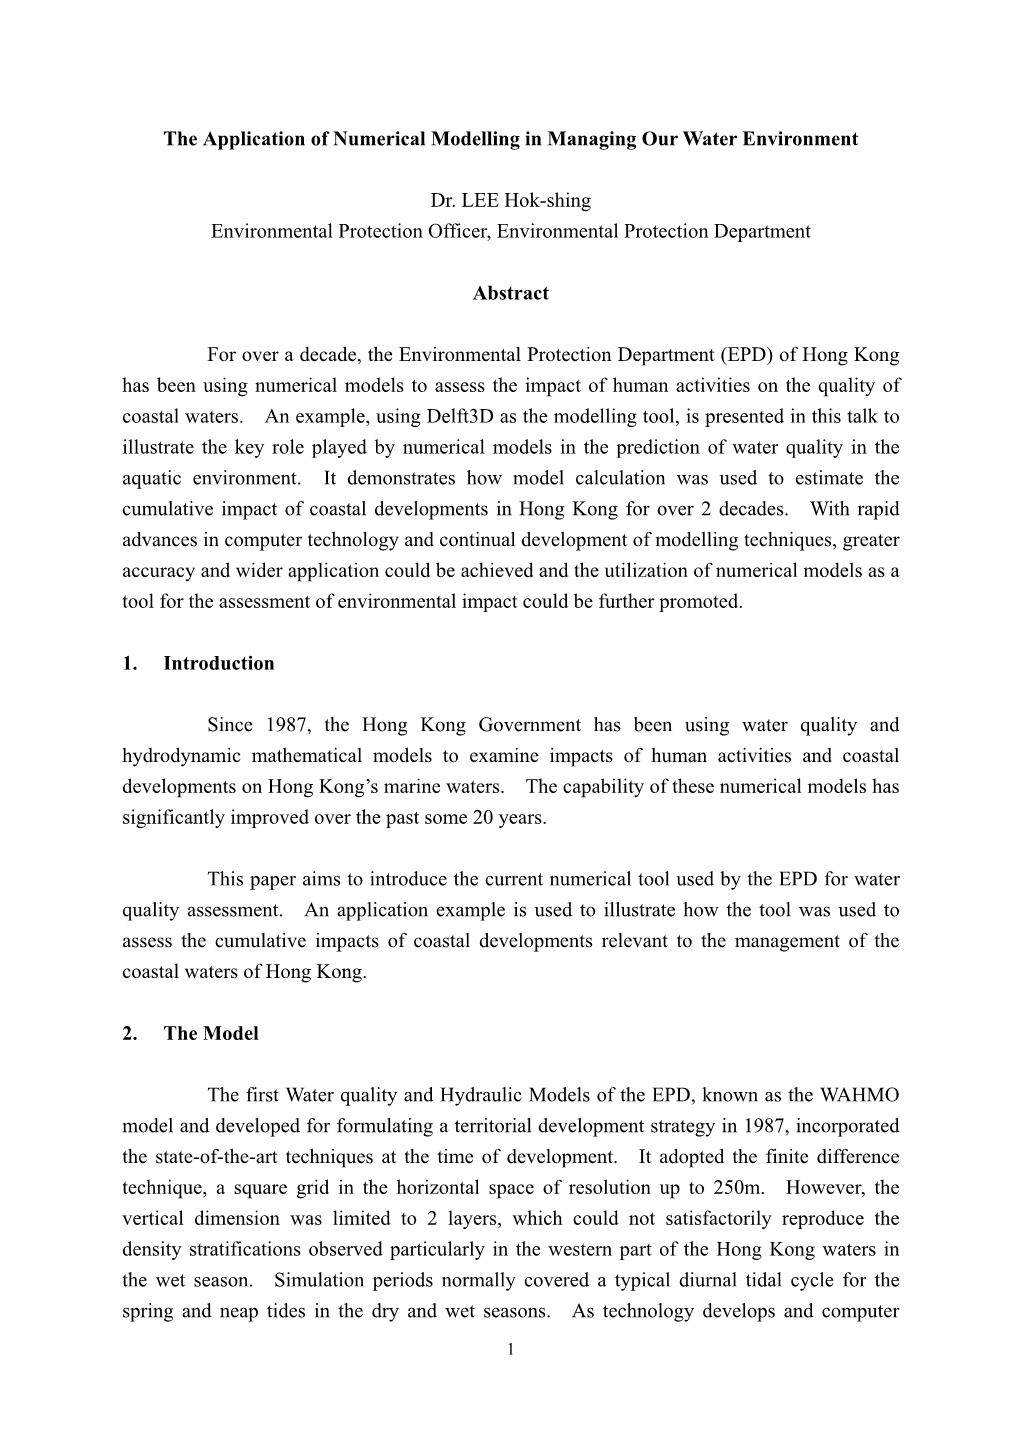 The Application of Numerical Modelling in Managing Our Water Environment Dr. LEE Hok-Shing Environmental Protection Officer